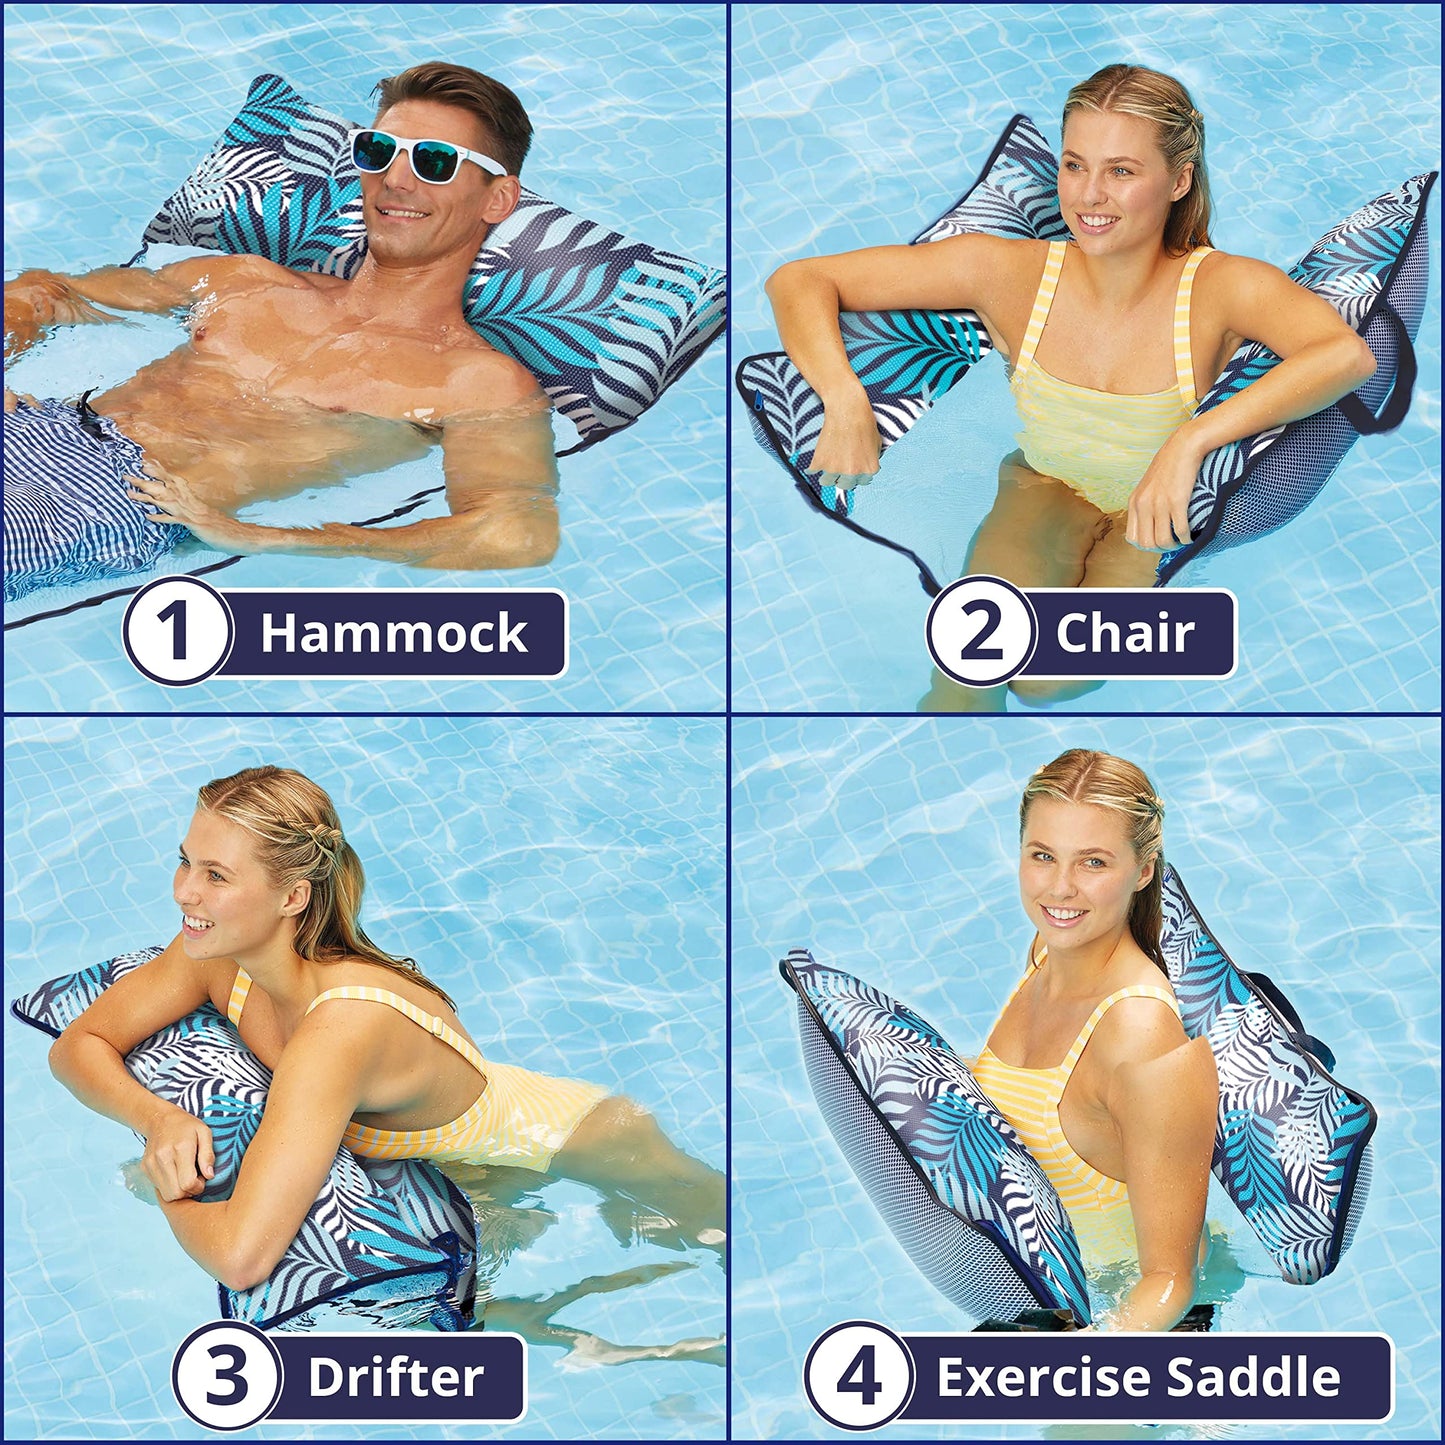 Aqua Original 4-in-1 Monterey Hammock Pool Float & Water Hammock – Multi-Purpose, Inflatable Pool Floats for Adults – Patented Thick, Non-Stick PVC Material Supreme Hammock - Blue Fern